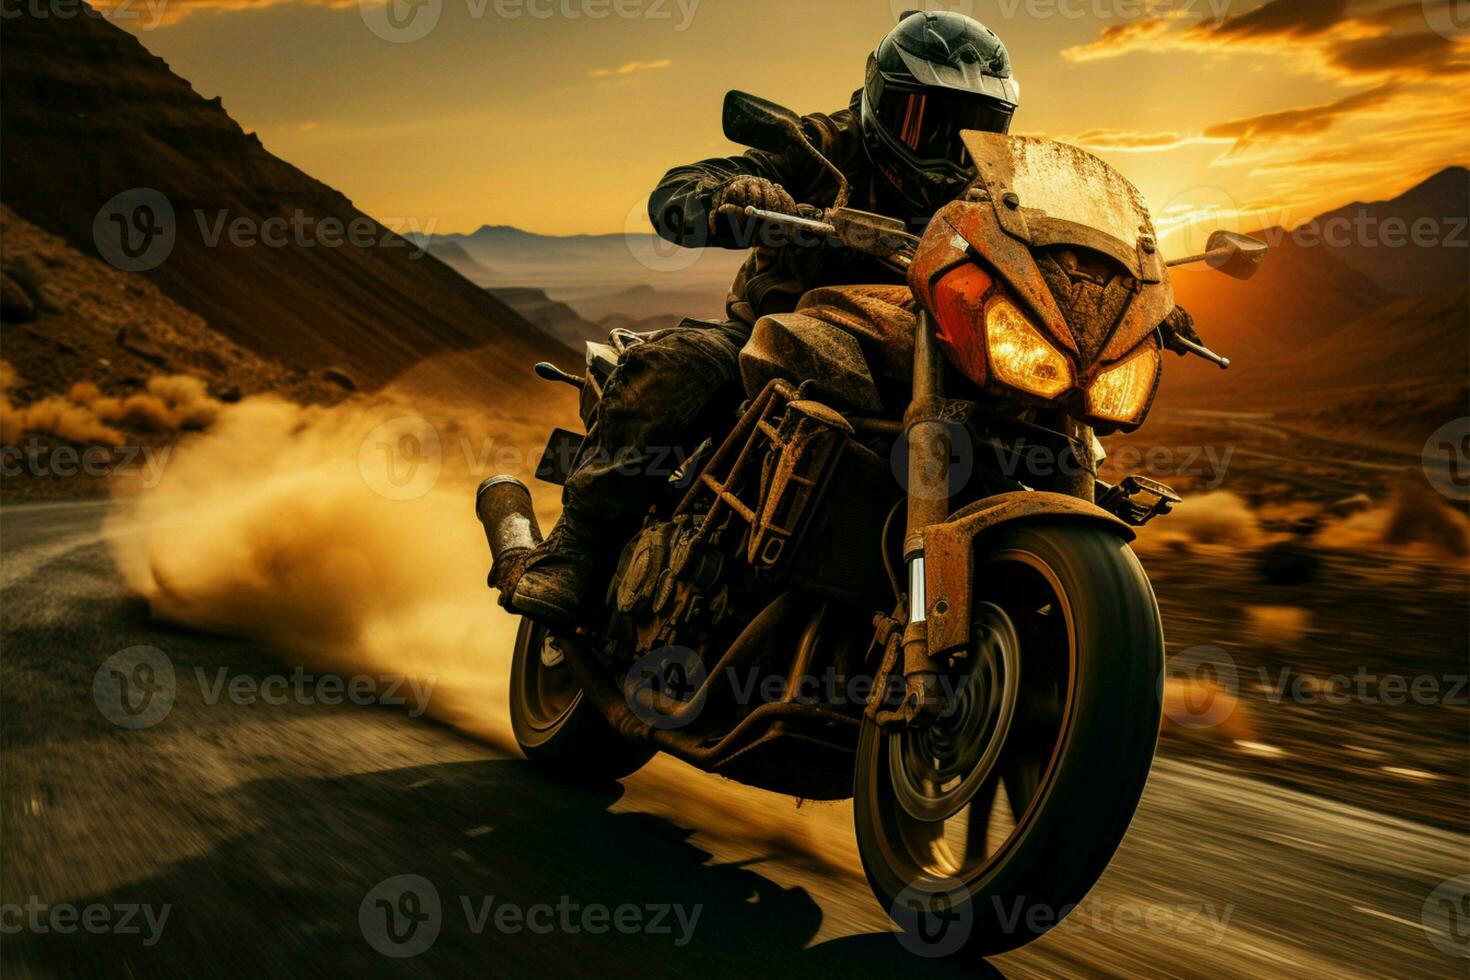 Sunrise highway ride Motorcyclist speeds, offering copious copy space, embodying morning adventure AI Generated photo